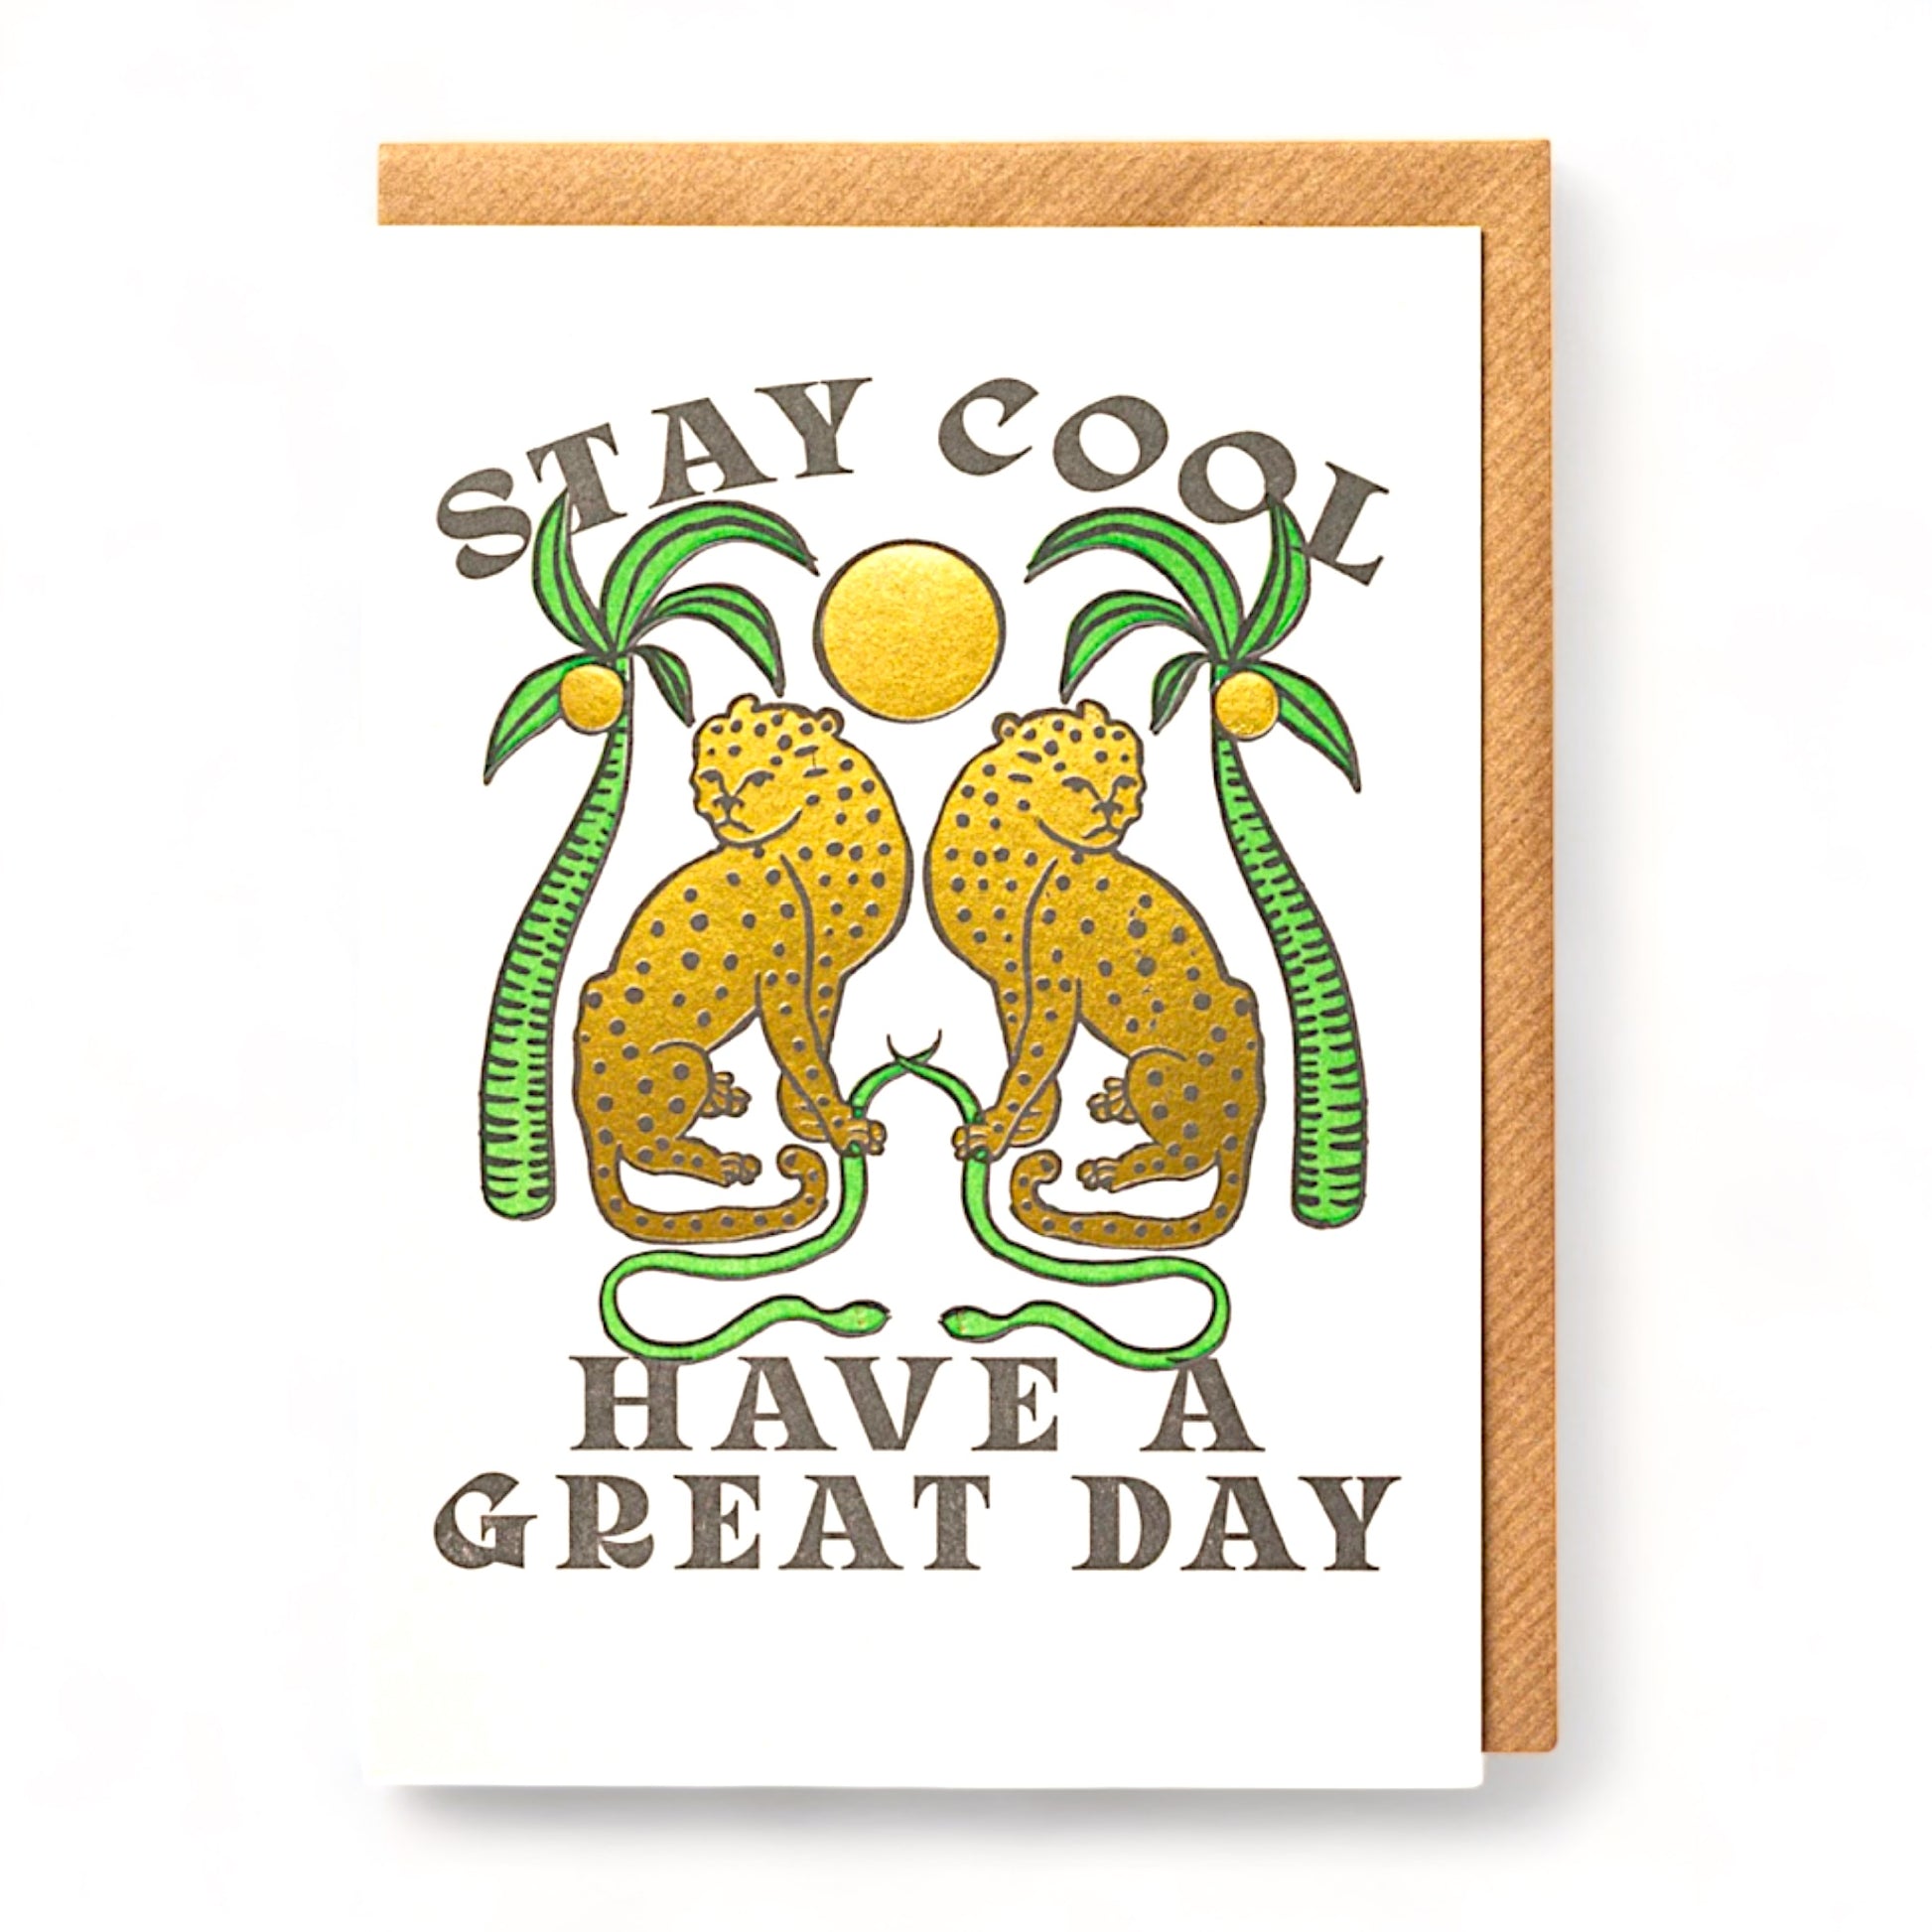 Stay Cool - Greeting Card - Hella Kitsch